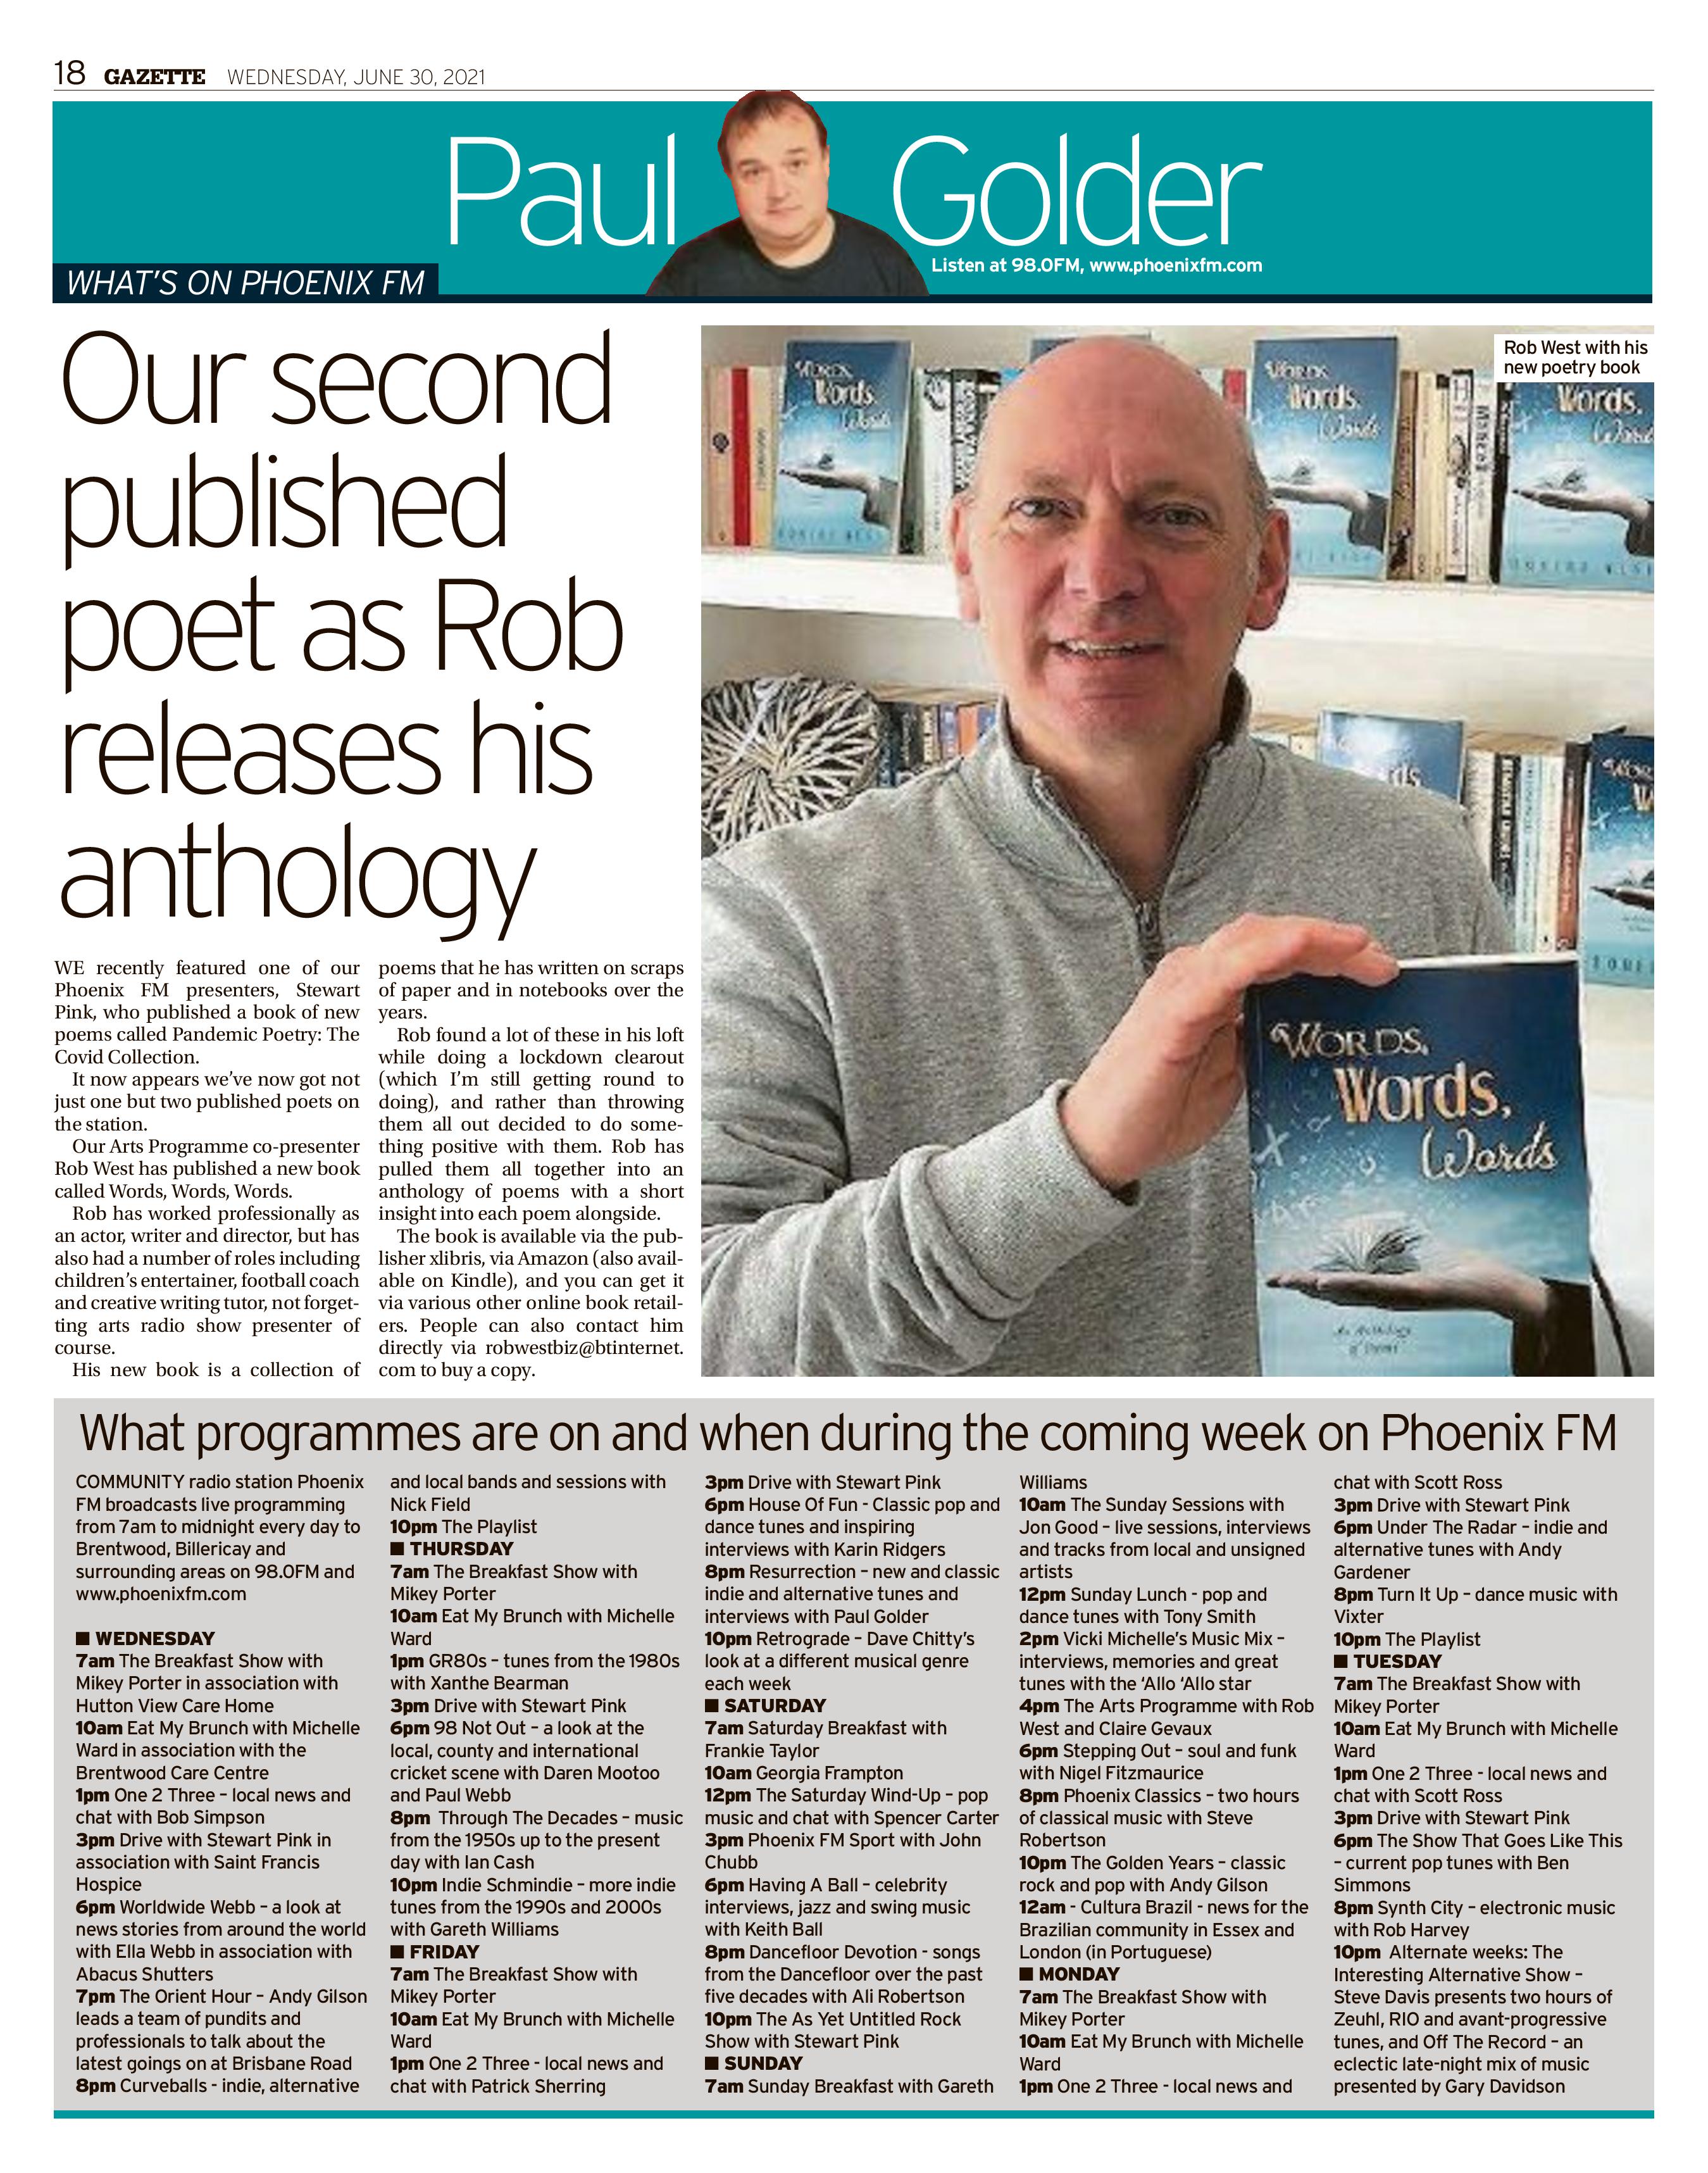 Our second published poet as Rob releases his anthology - Phoenix FM